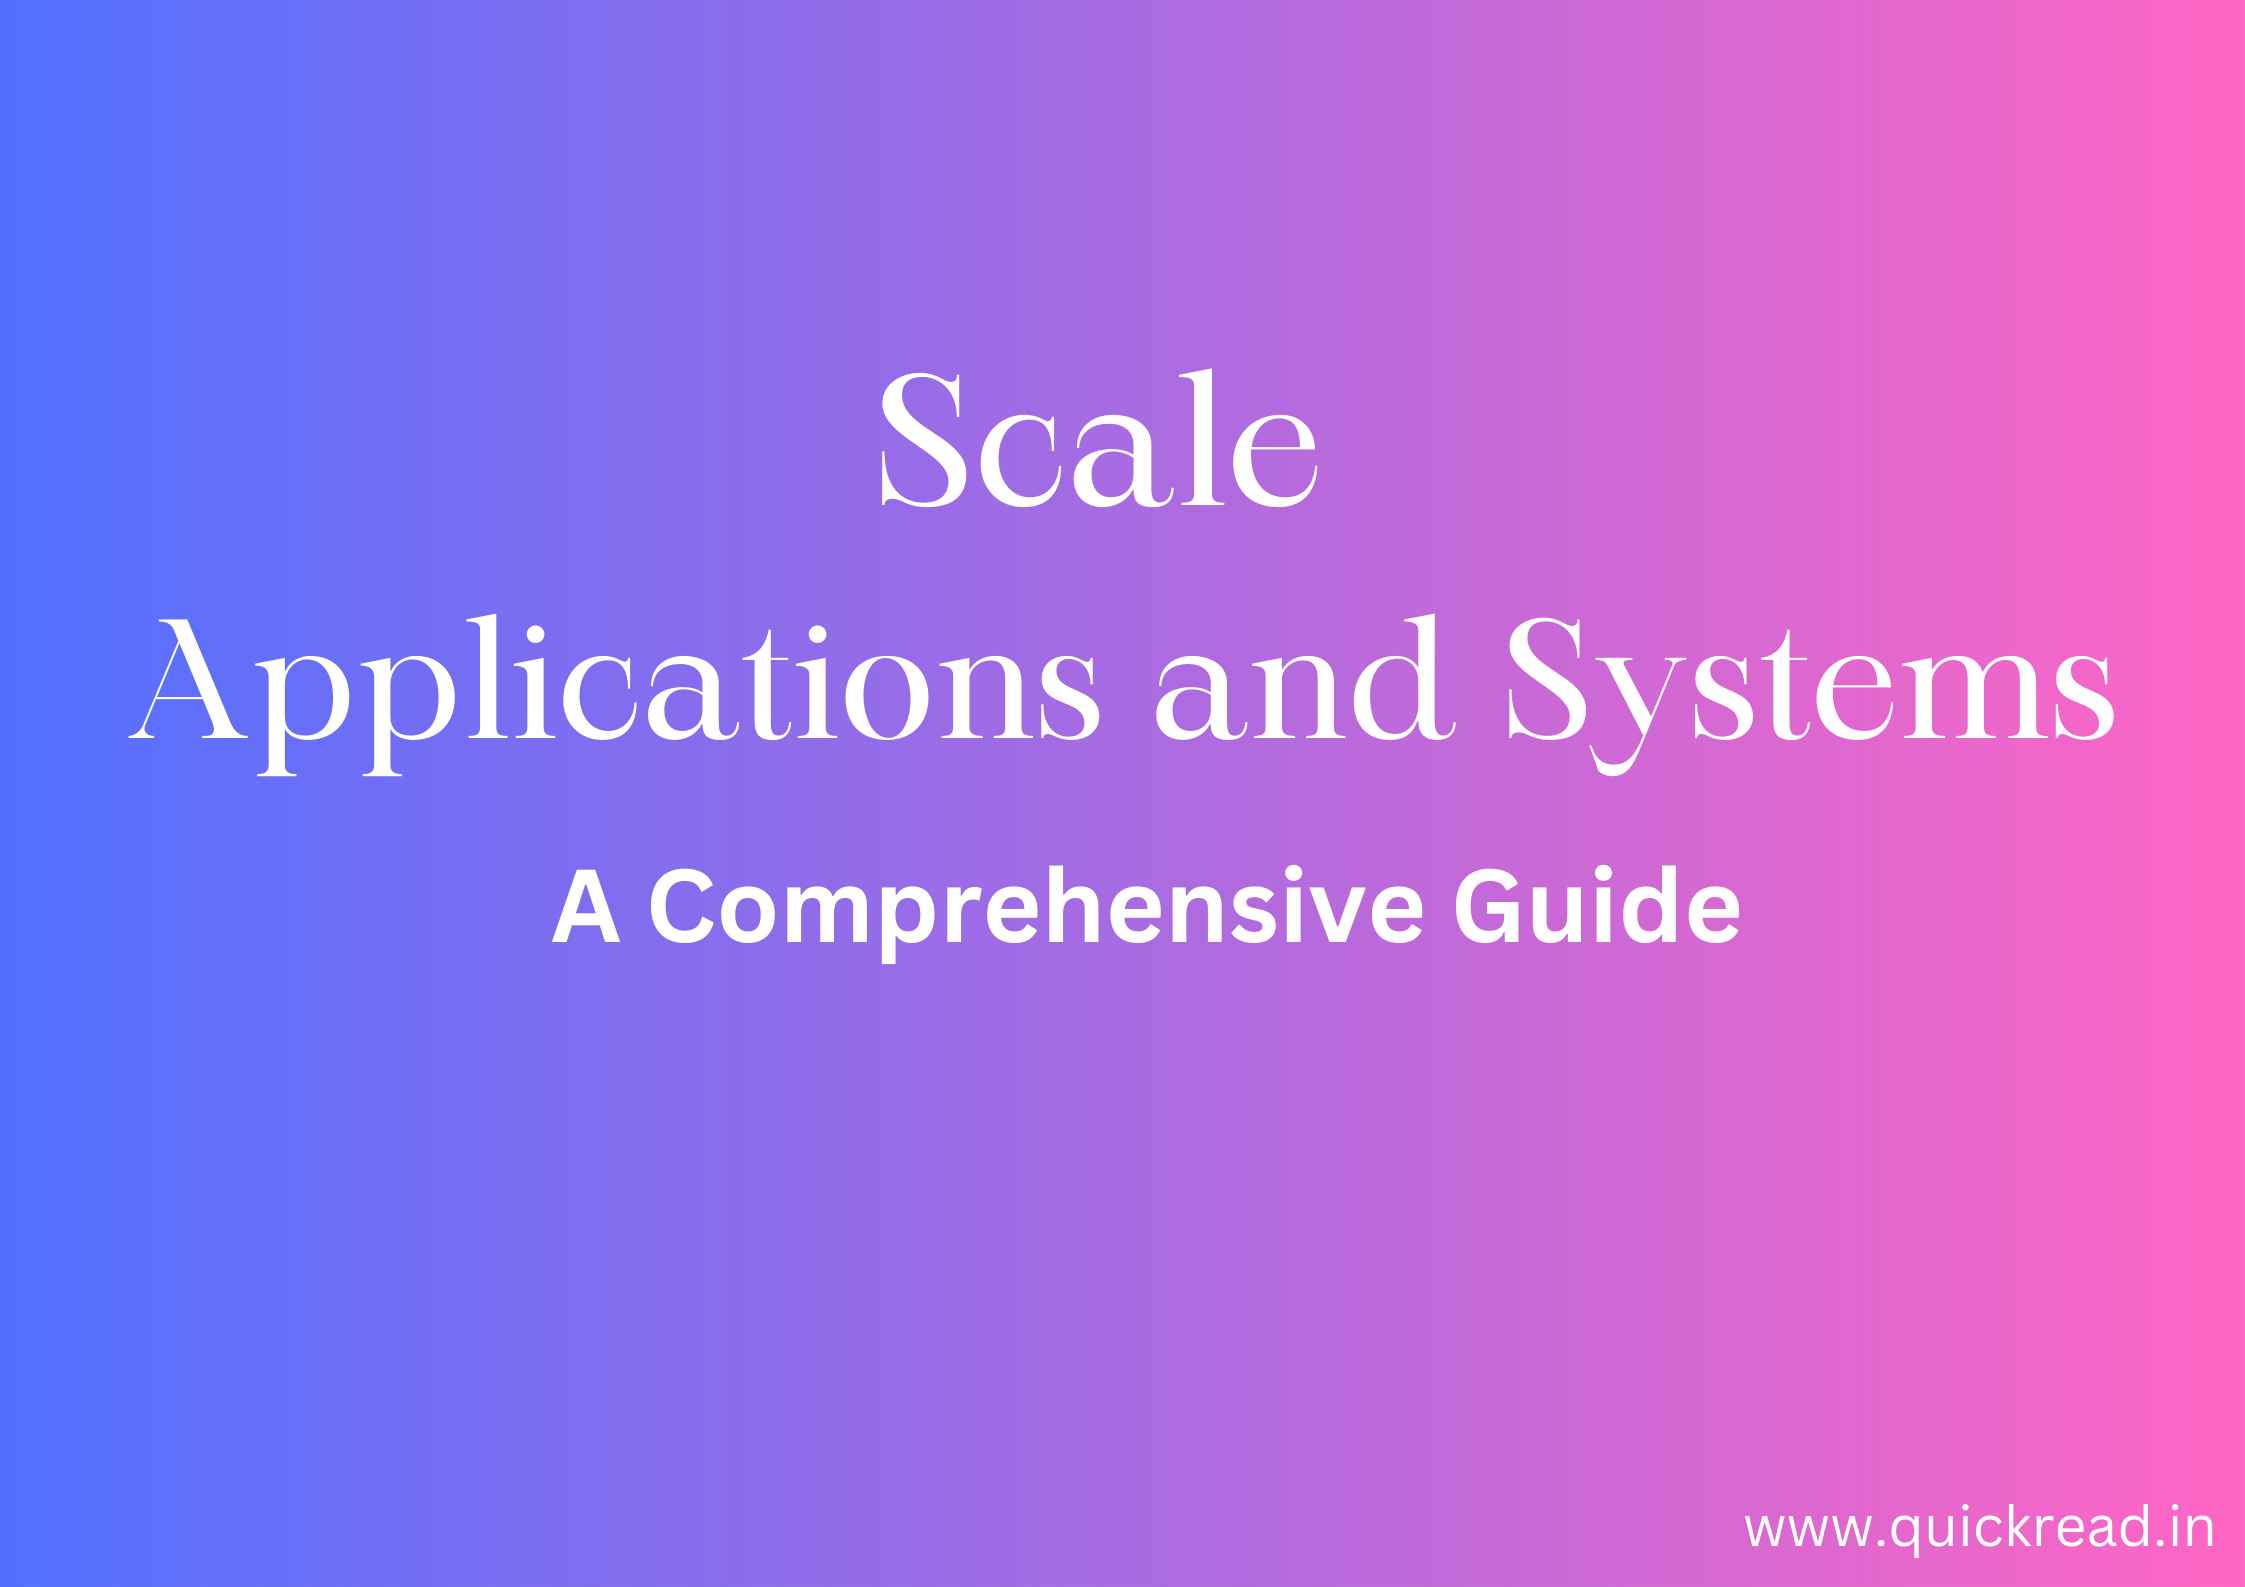 Scale Applications and Systems A Comprehensive Guide